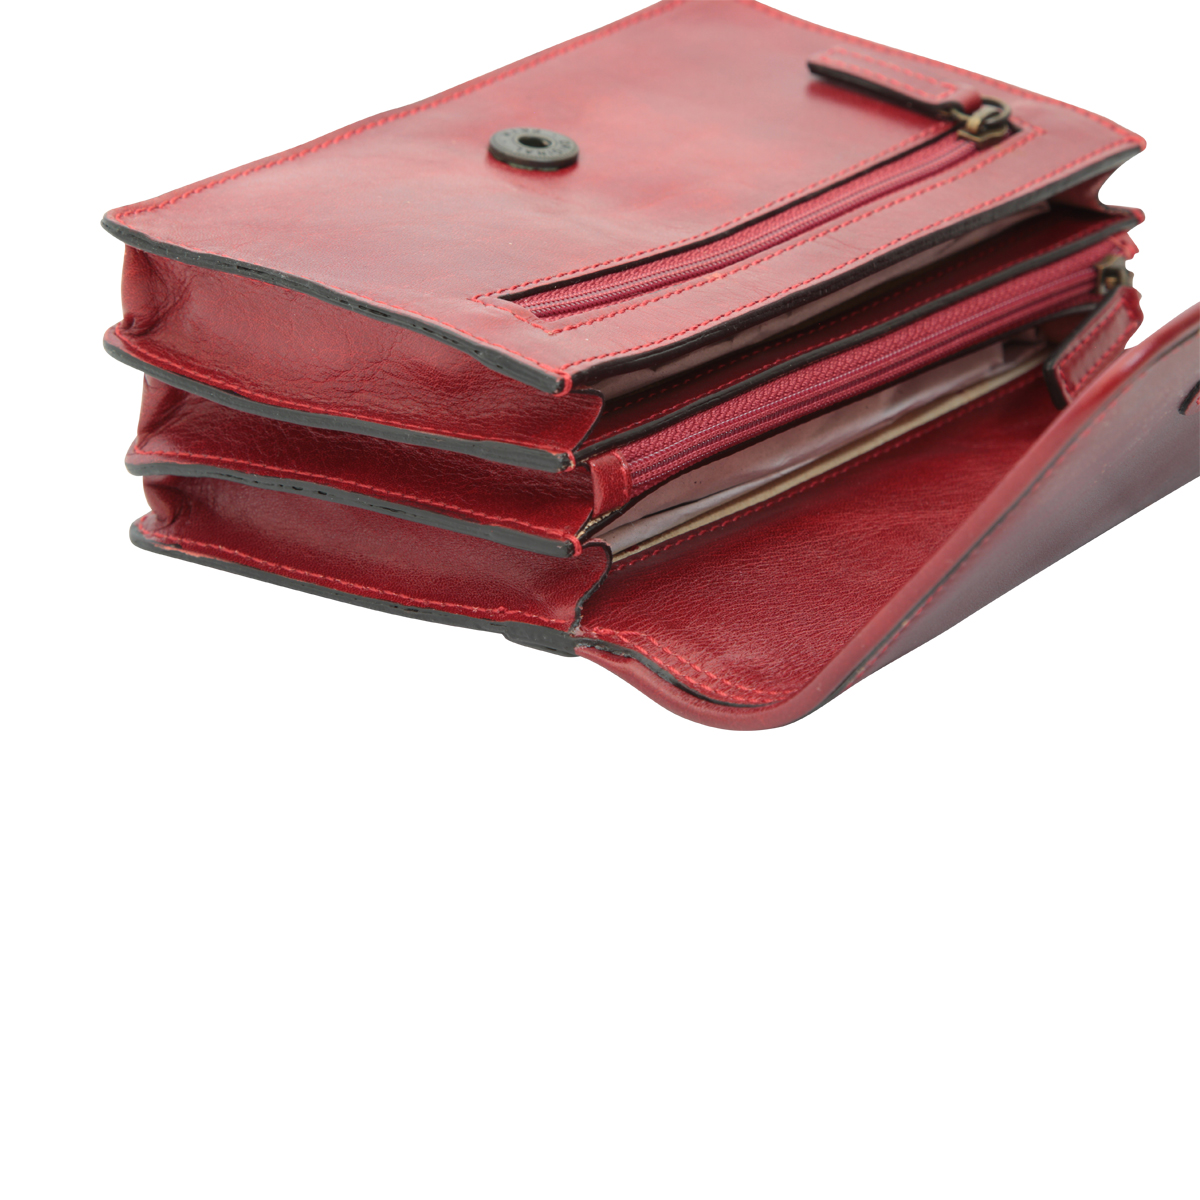 Leather pochette - red | 407989RO US | Old Angler Firenze